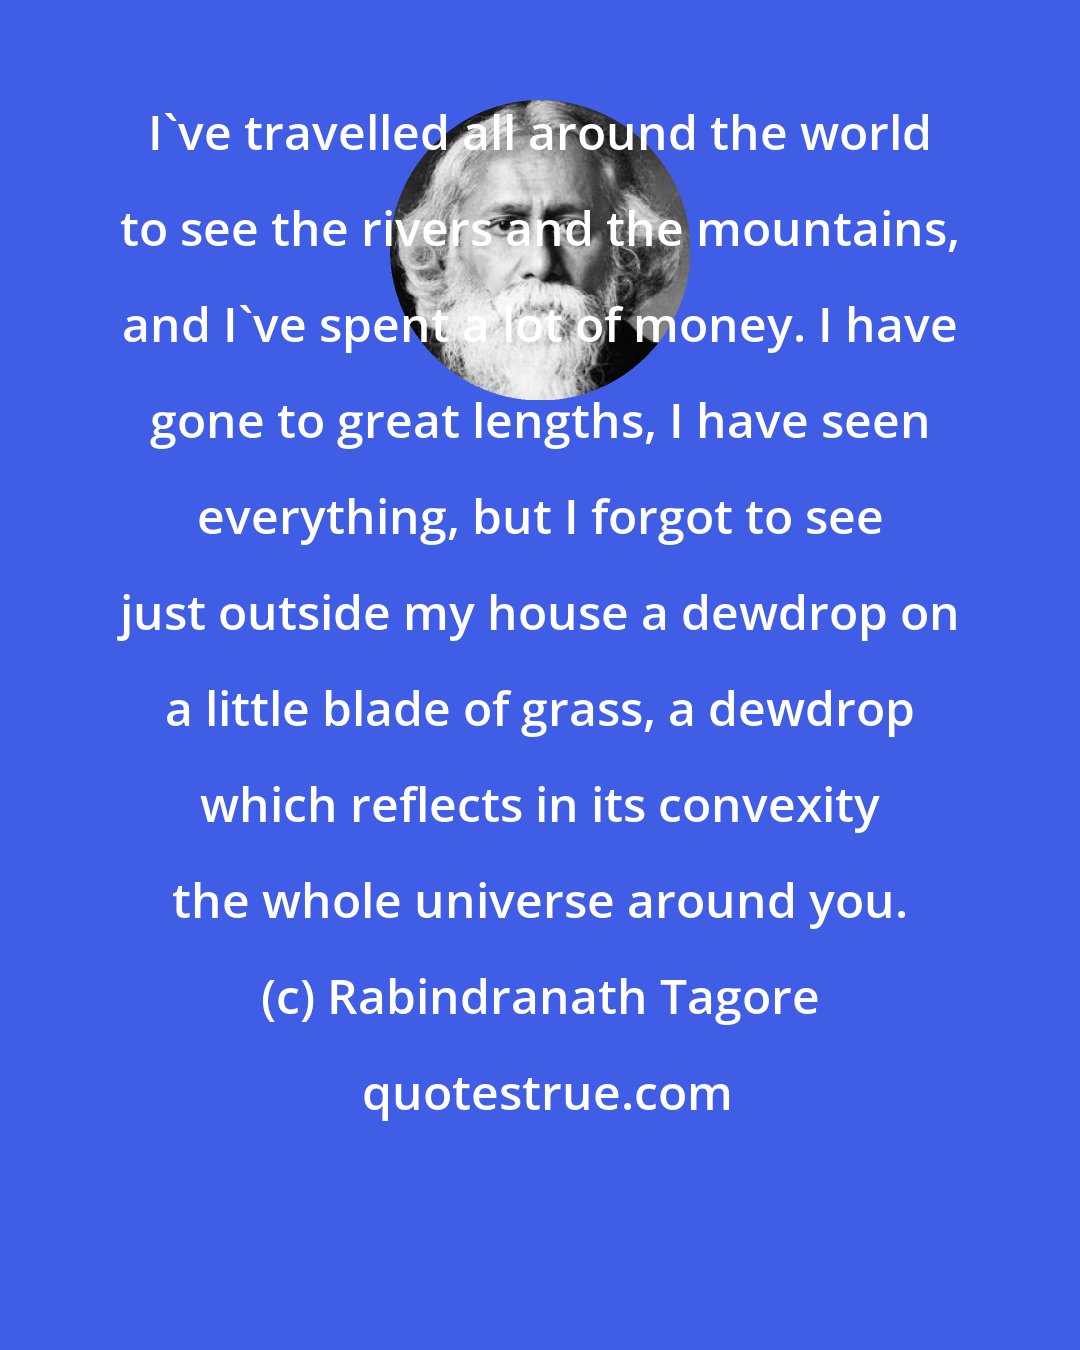 Rabindranath Tagore: I've travelled all around the world to see the rivers and the mountains, and I've spent a lot of money. I have gone to great lengths, I have seen everything, but I forgot to see just outside my house a dewdrop on a little blade of grass, a dewdrop which reflects in its convexity the whole universe around you.